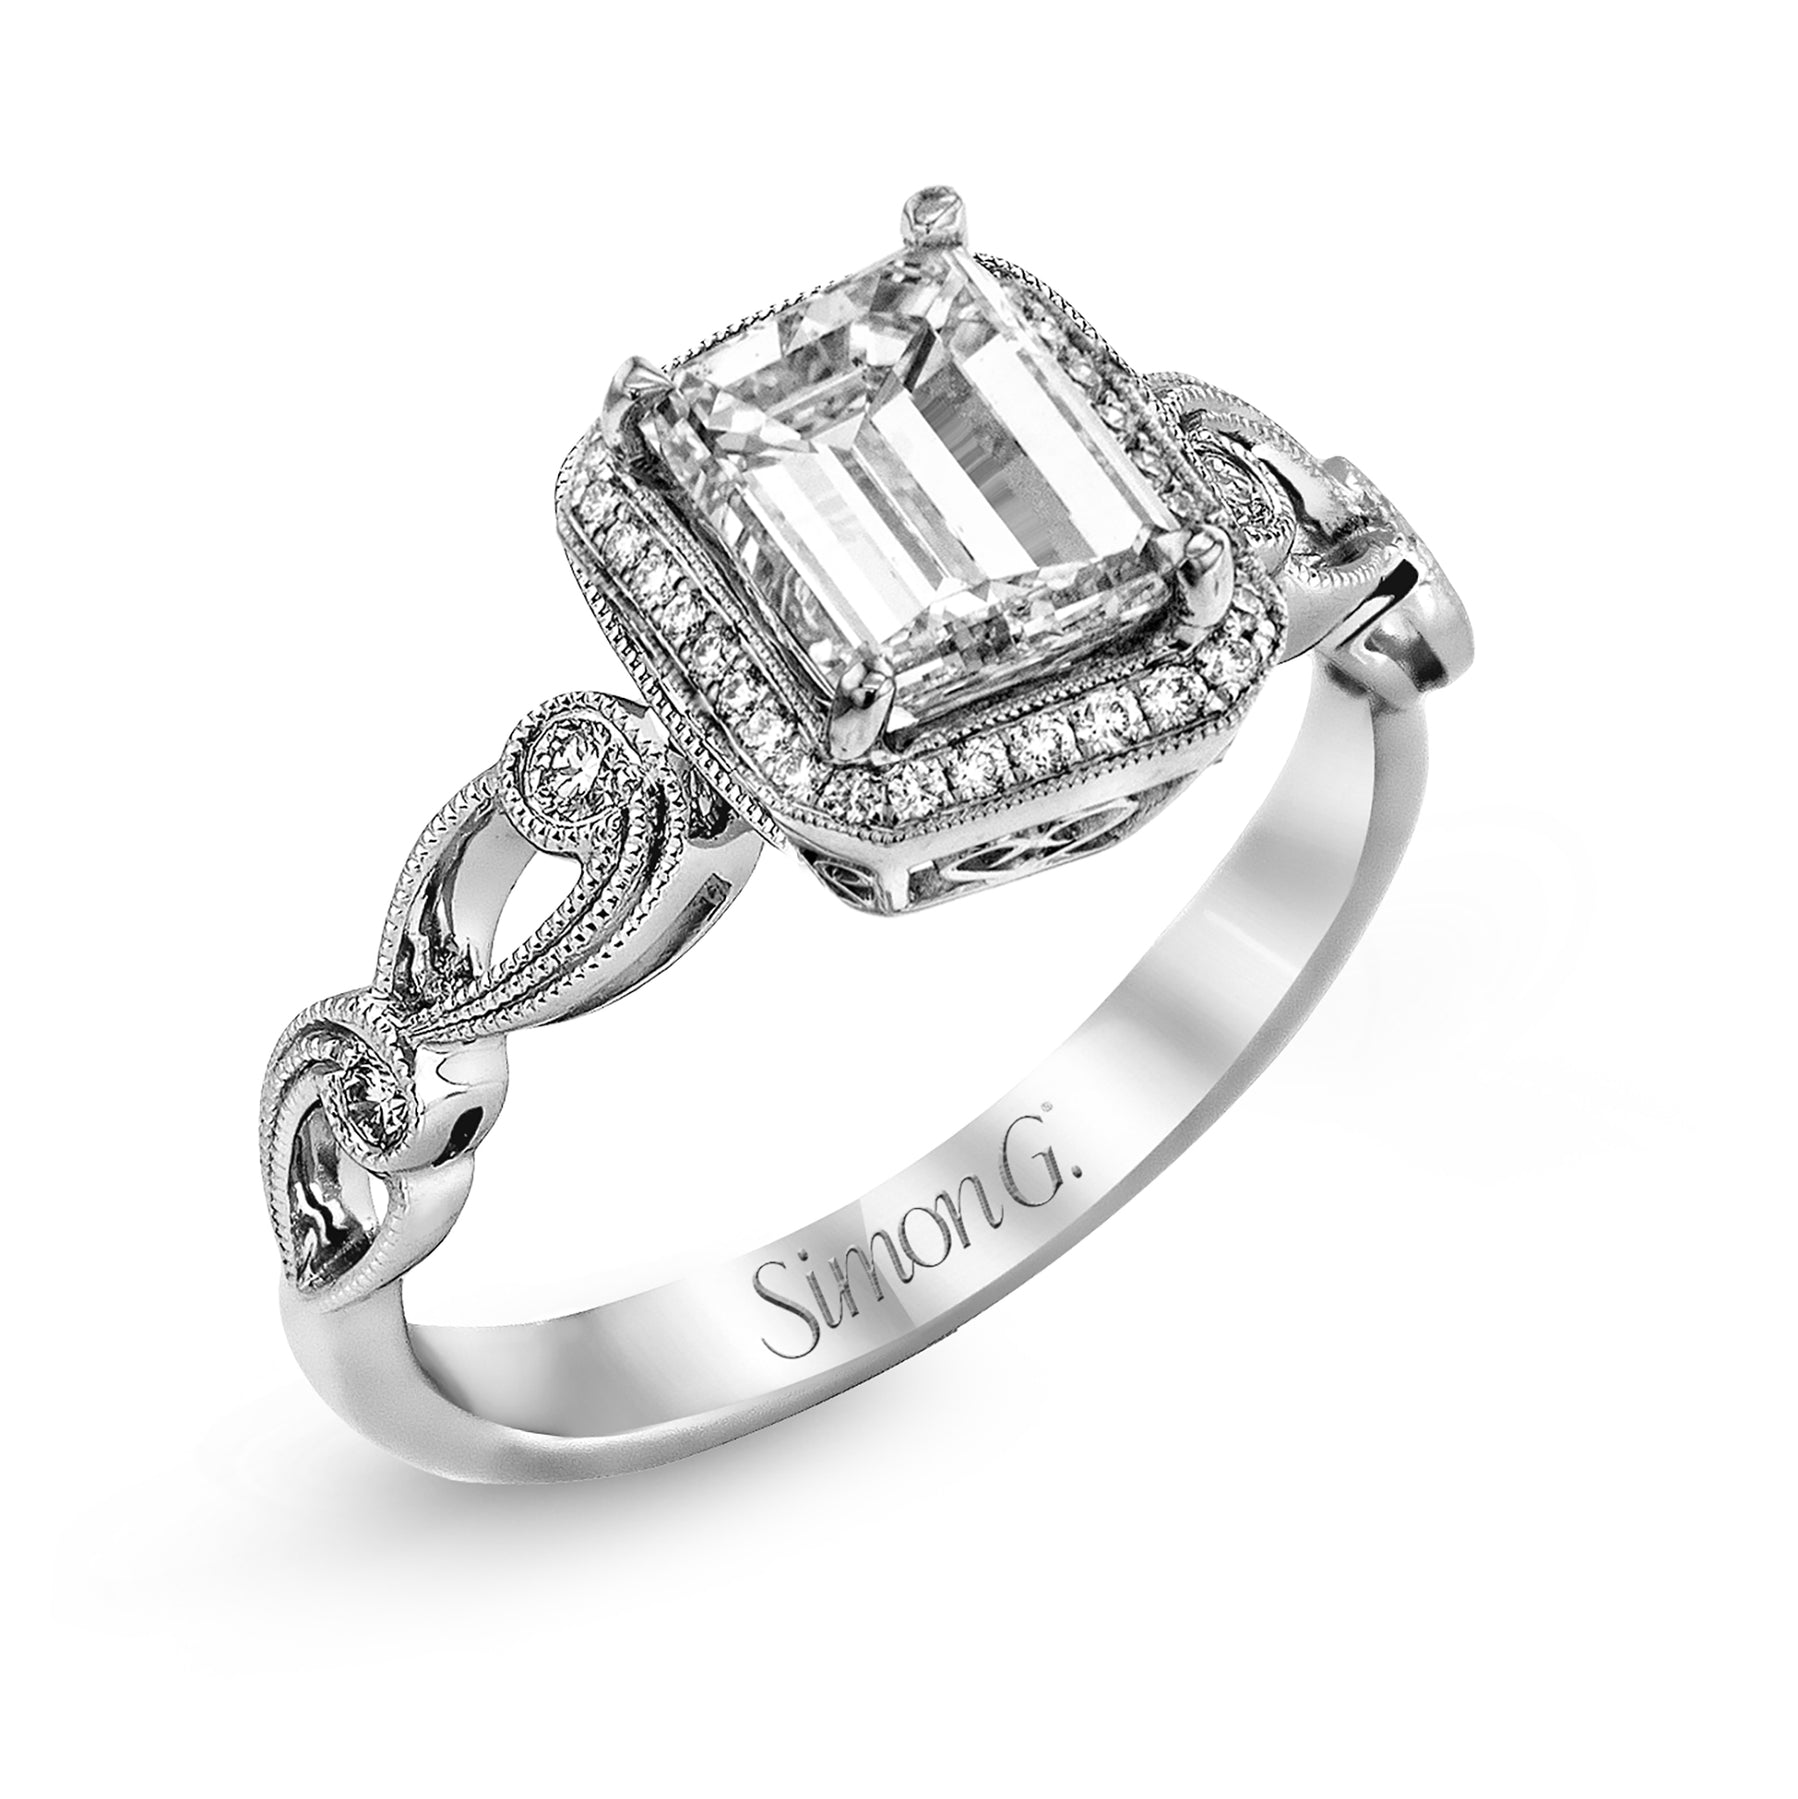 Emerald-Cut Halo Engagement Ring In 18k Gold With Diamonds TR526-EM